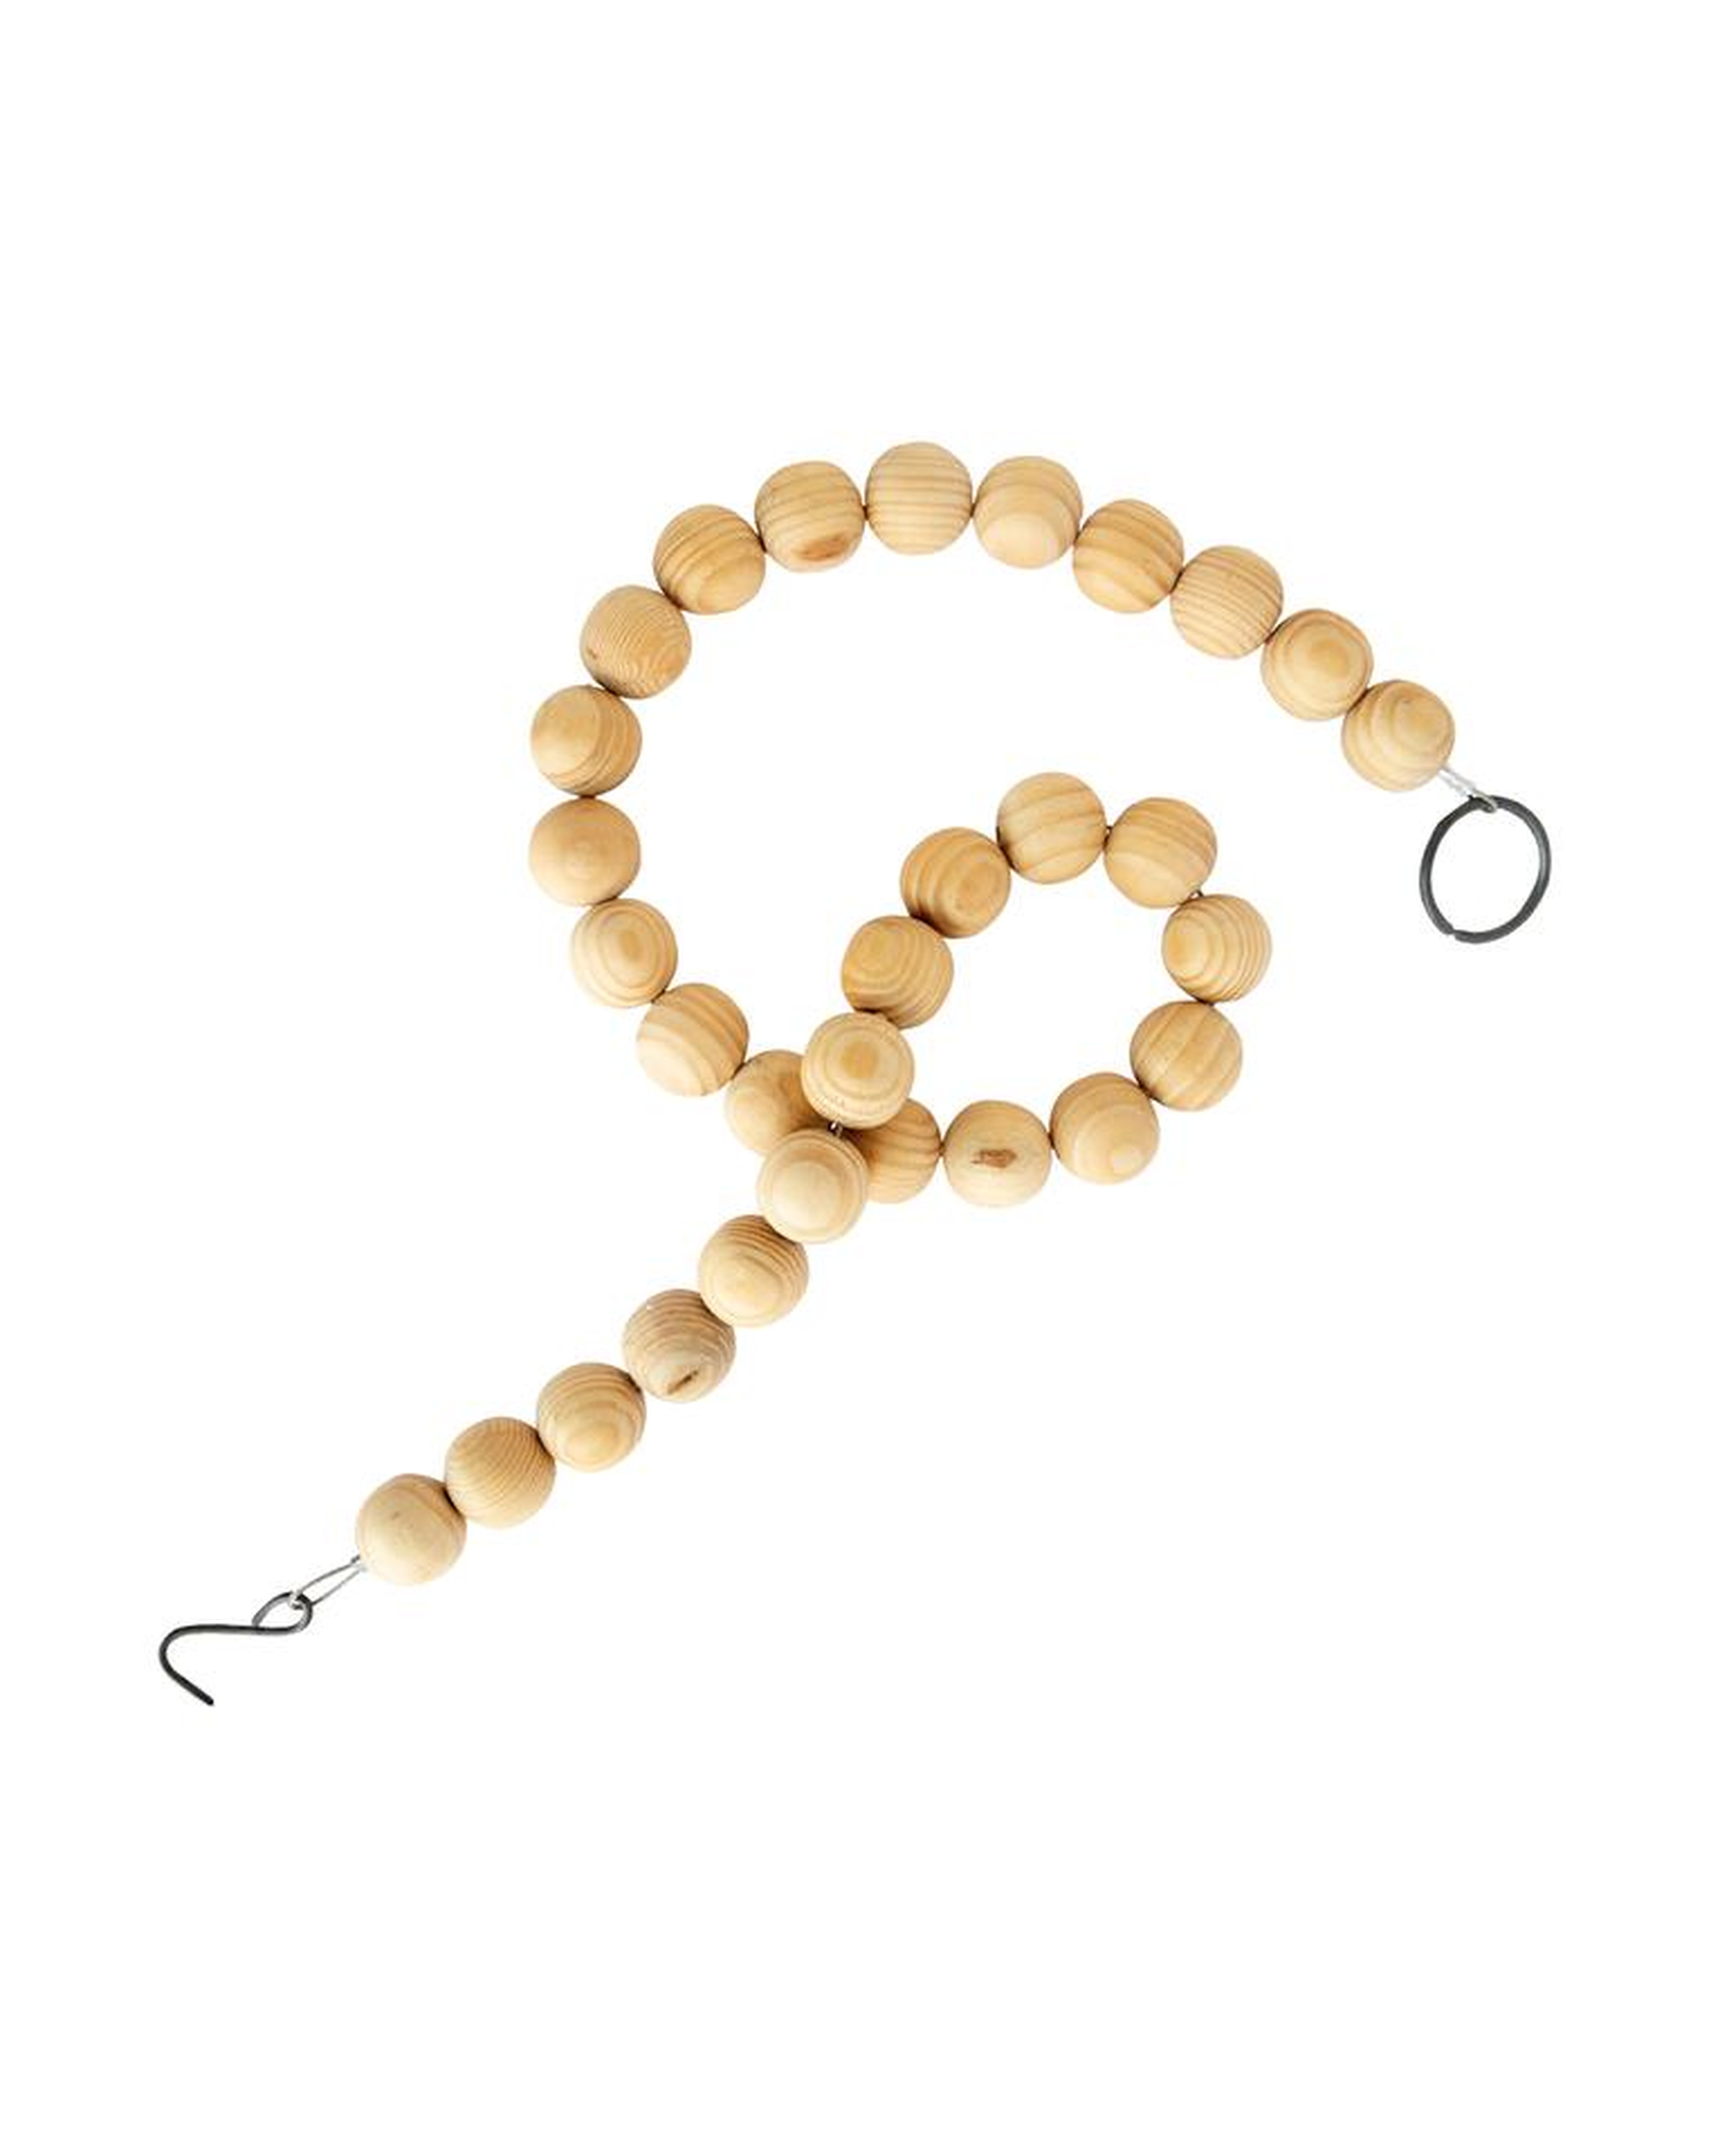 Wooden Beads - McGee & Co.